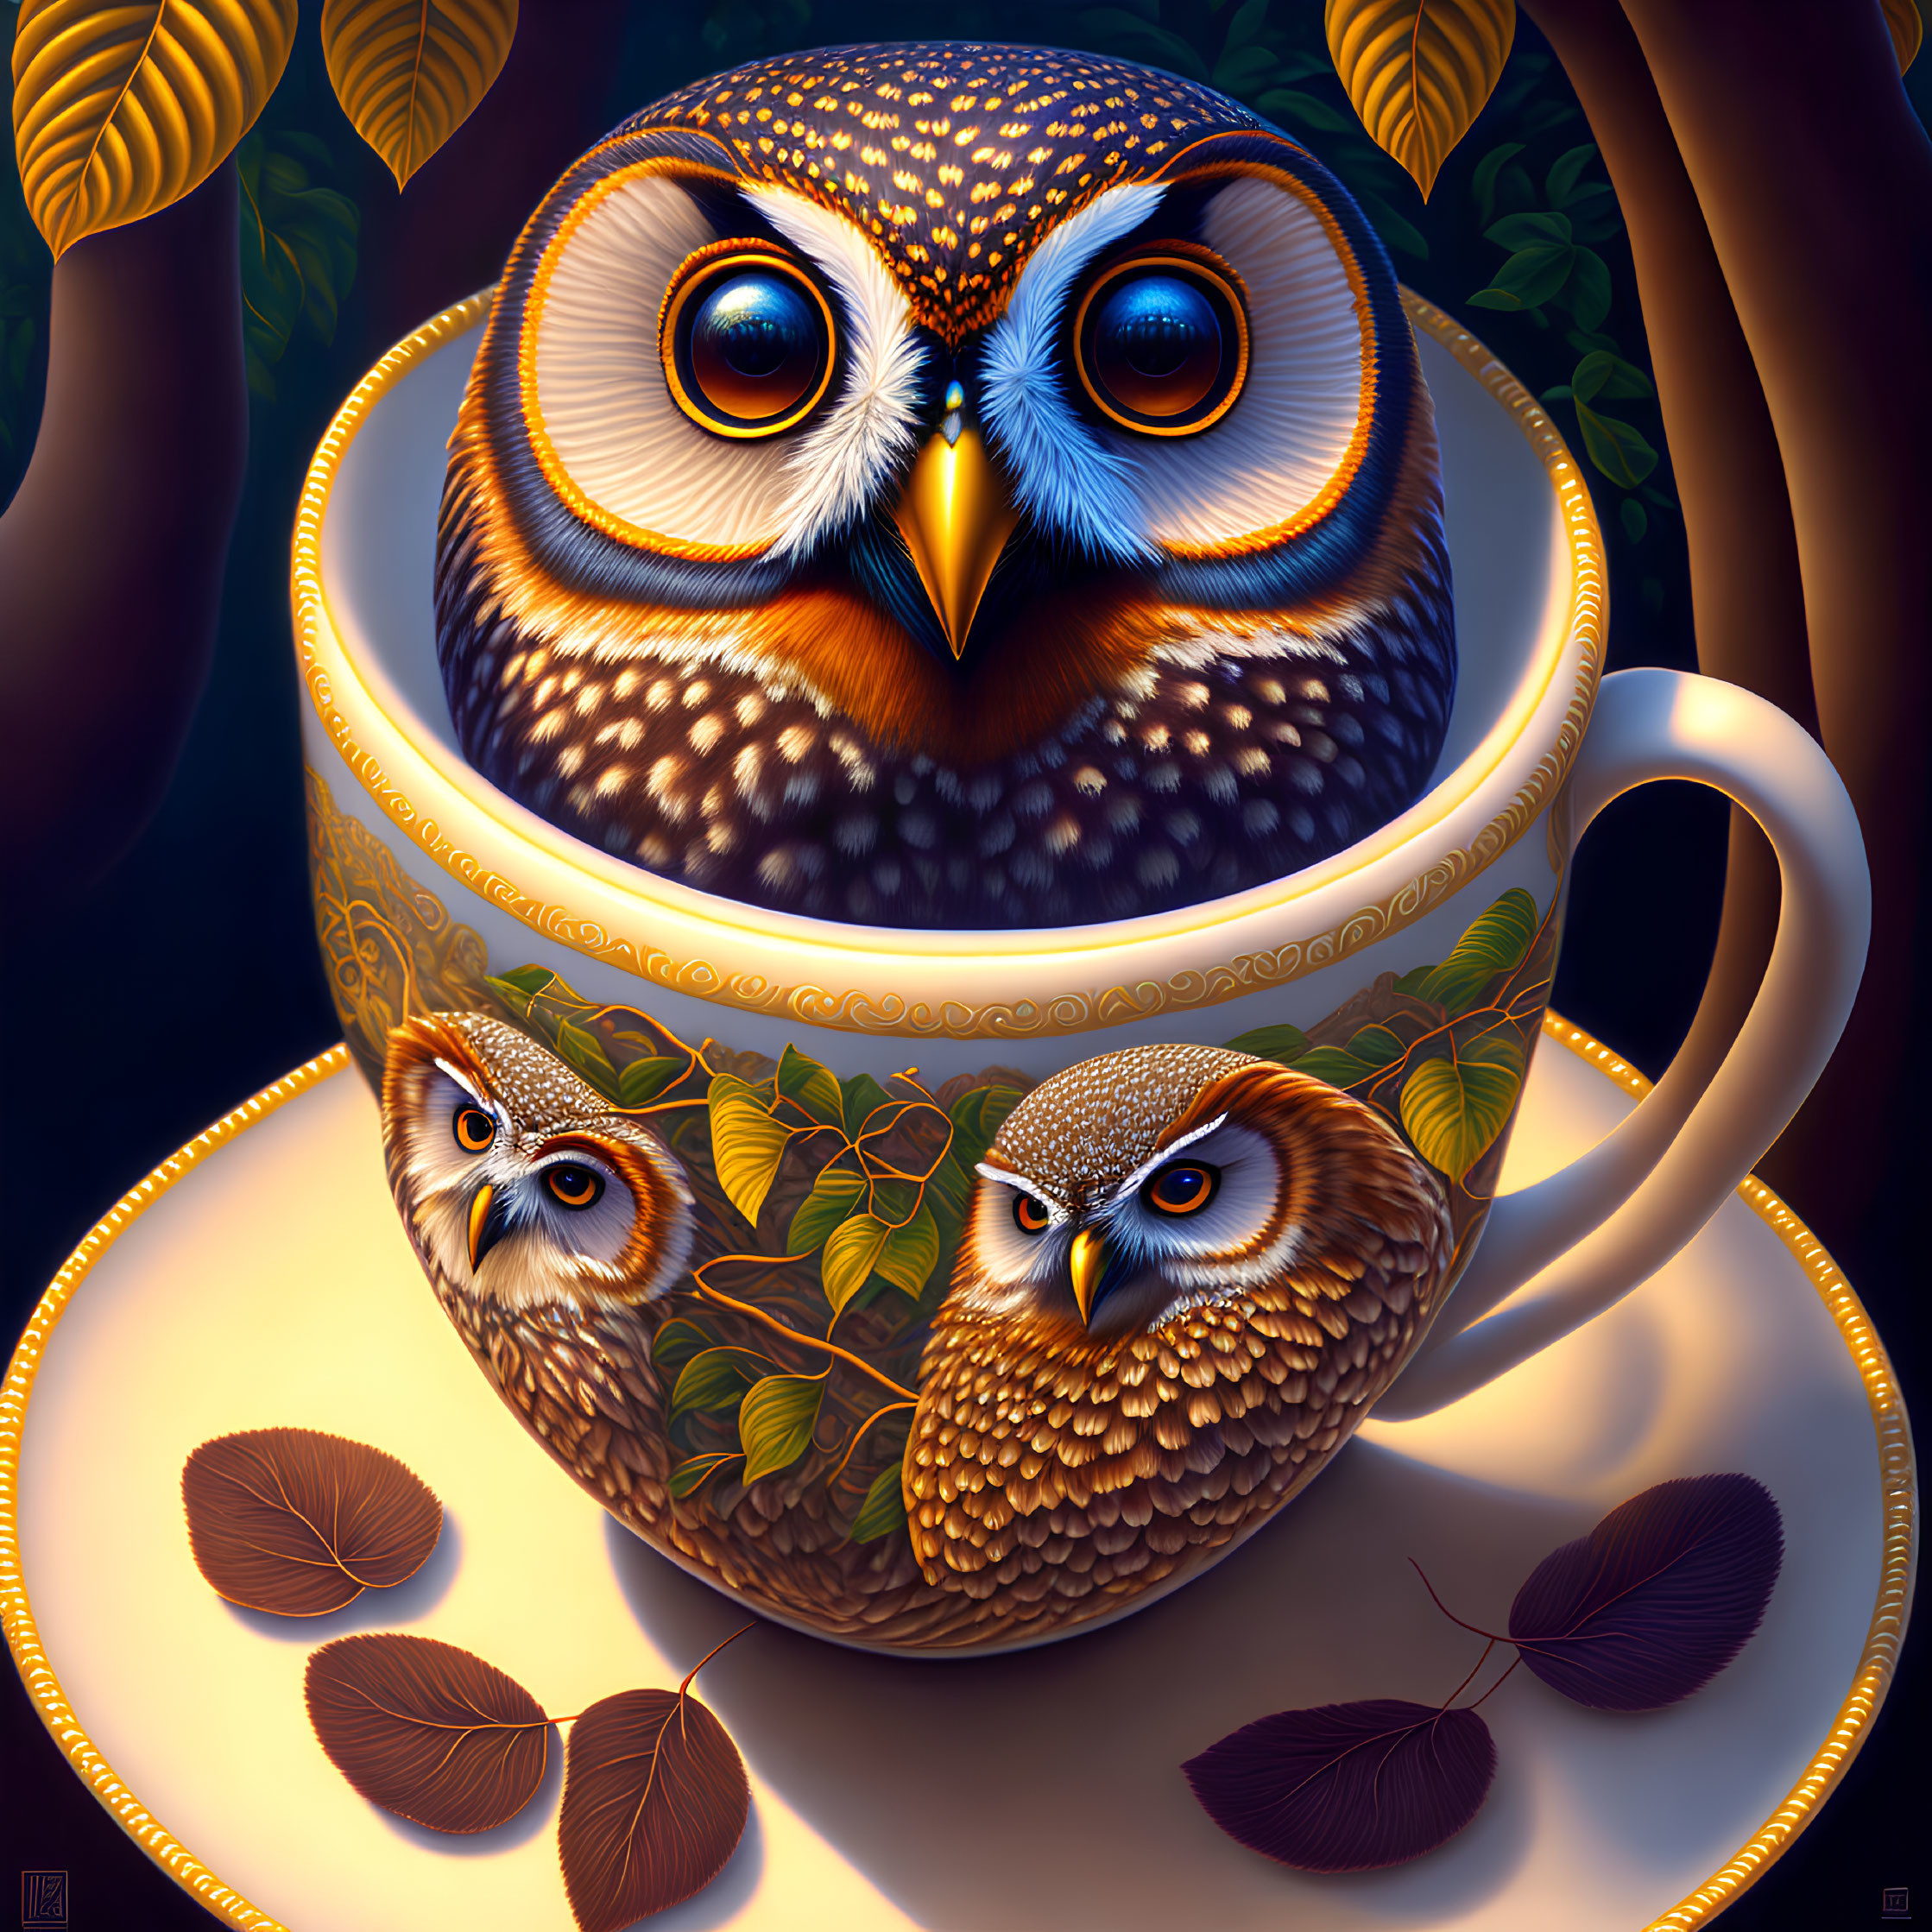 Illustration of owl with expressive eyes in teacup surrounded by leaves